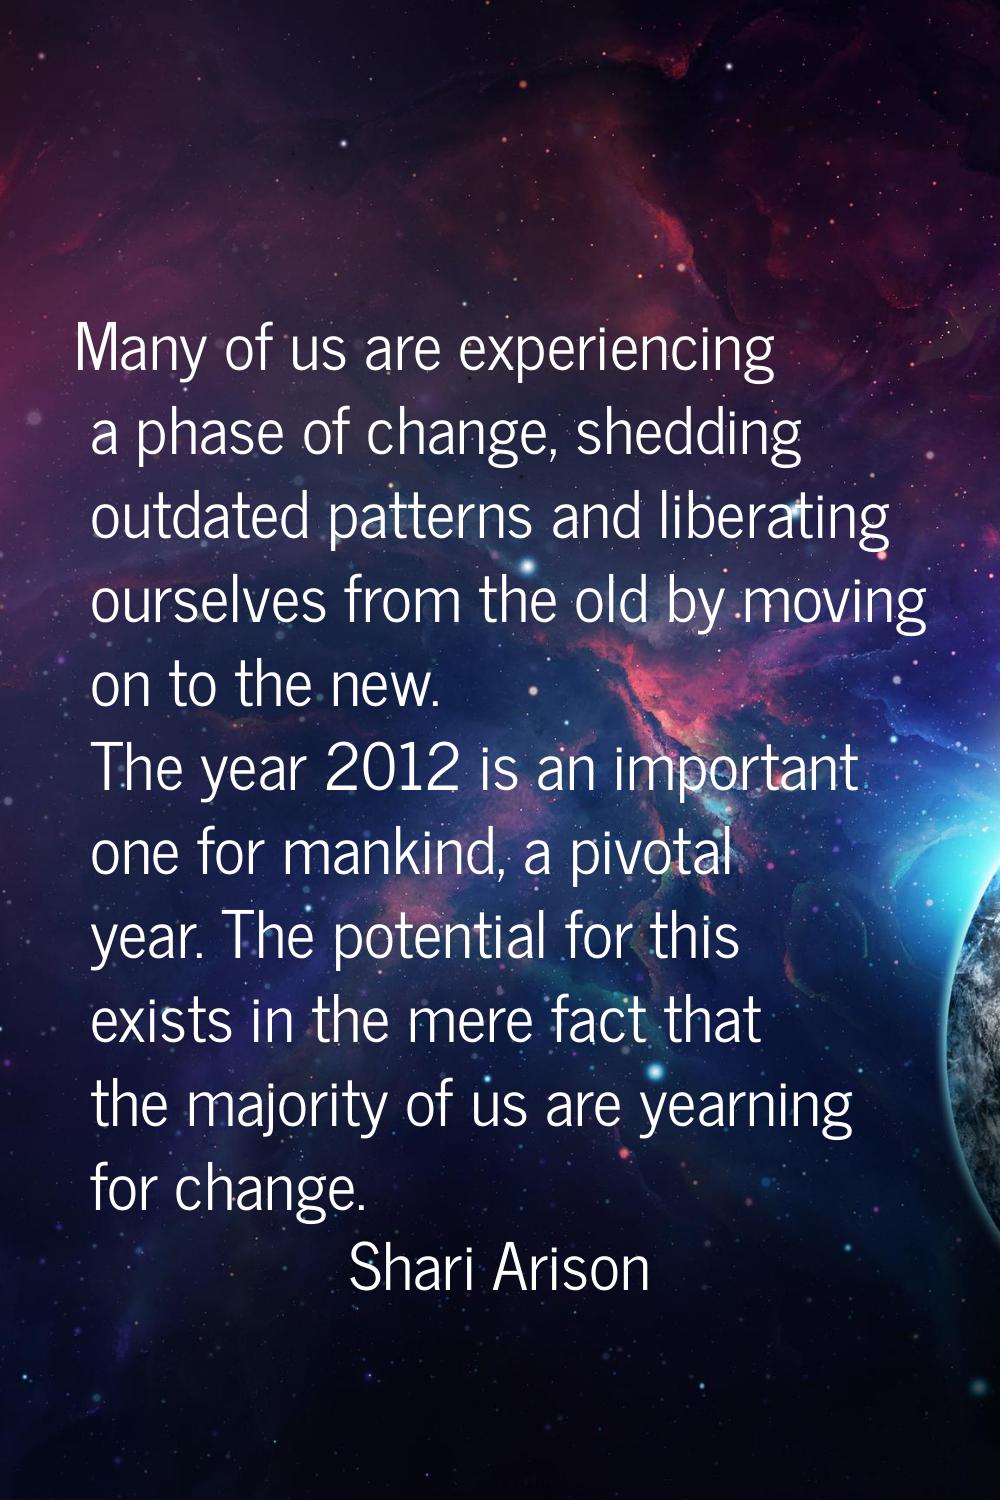 Many of us are experiencing a phase of change, shedding outdated patterns and liberating ourselves 